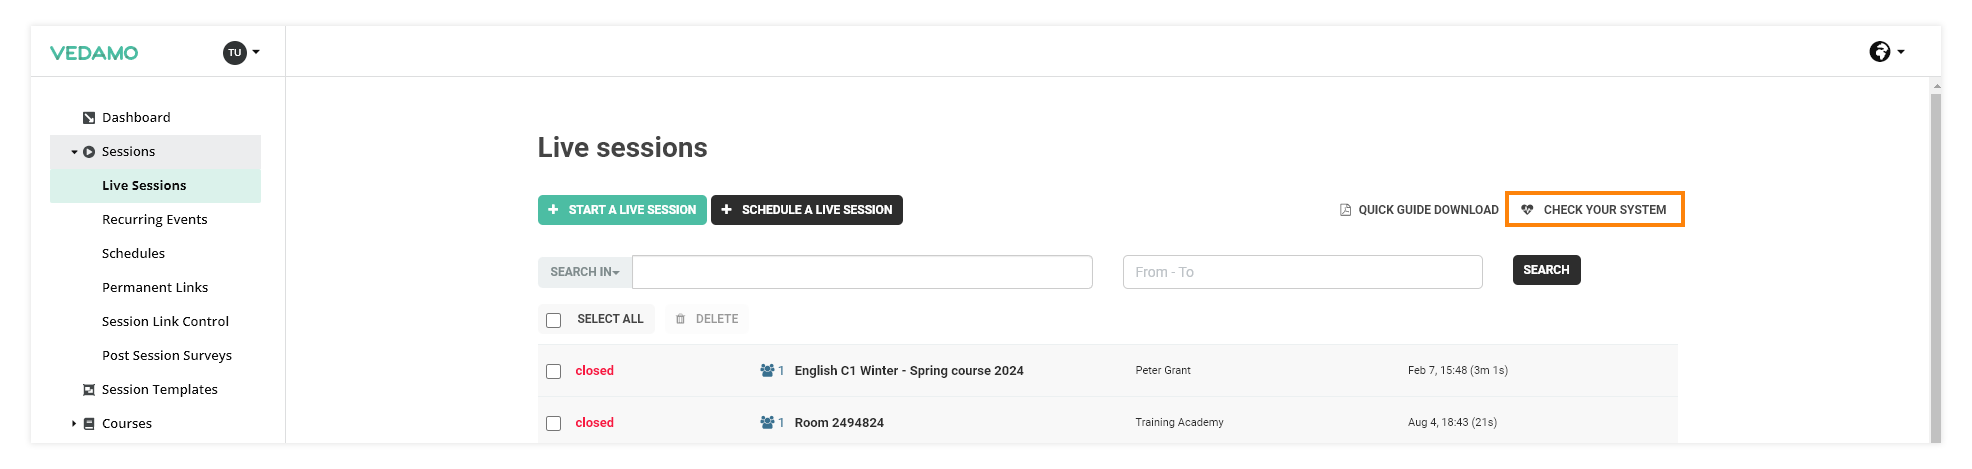 The System check is also available as an external (without starting a new session) feature